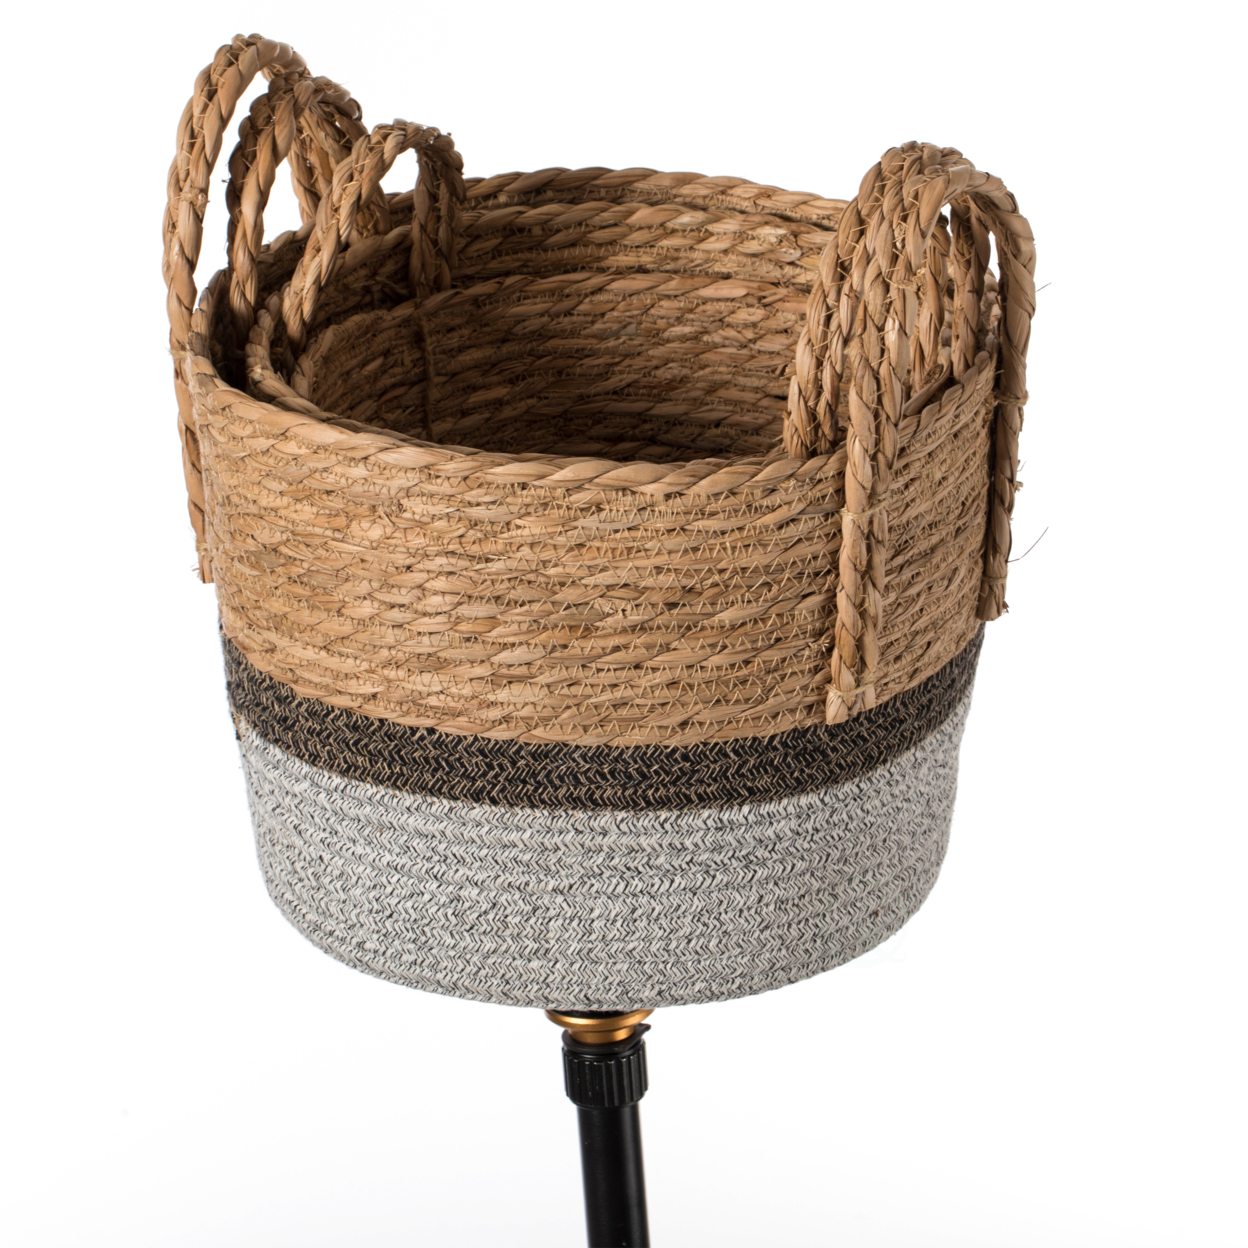 Straw Decorative Round Storage Basket Set Of 3 With Woven Handles For The Playroom, Bedroom, And Living Room